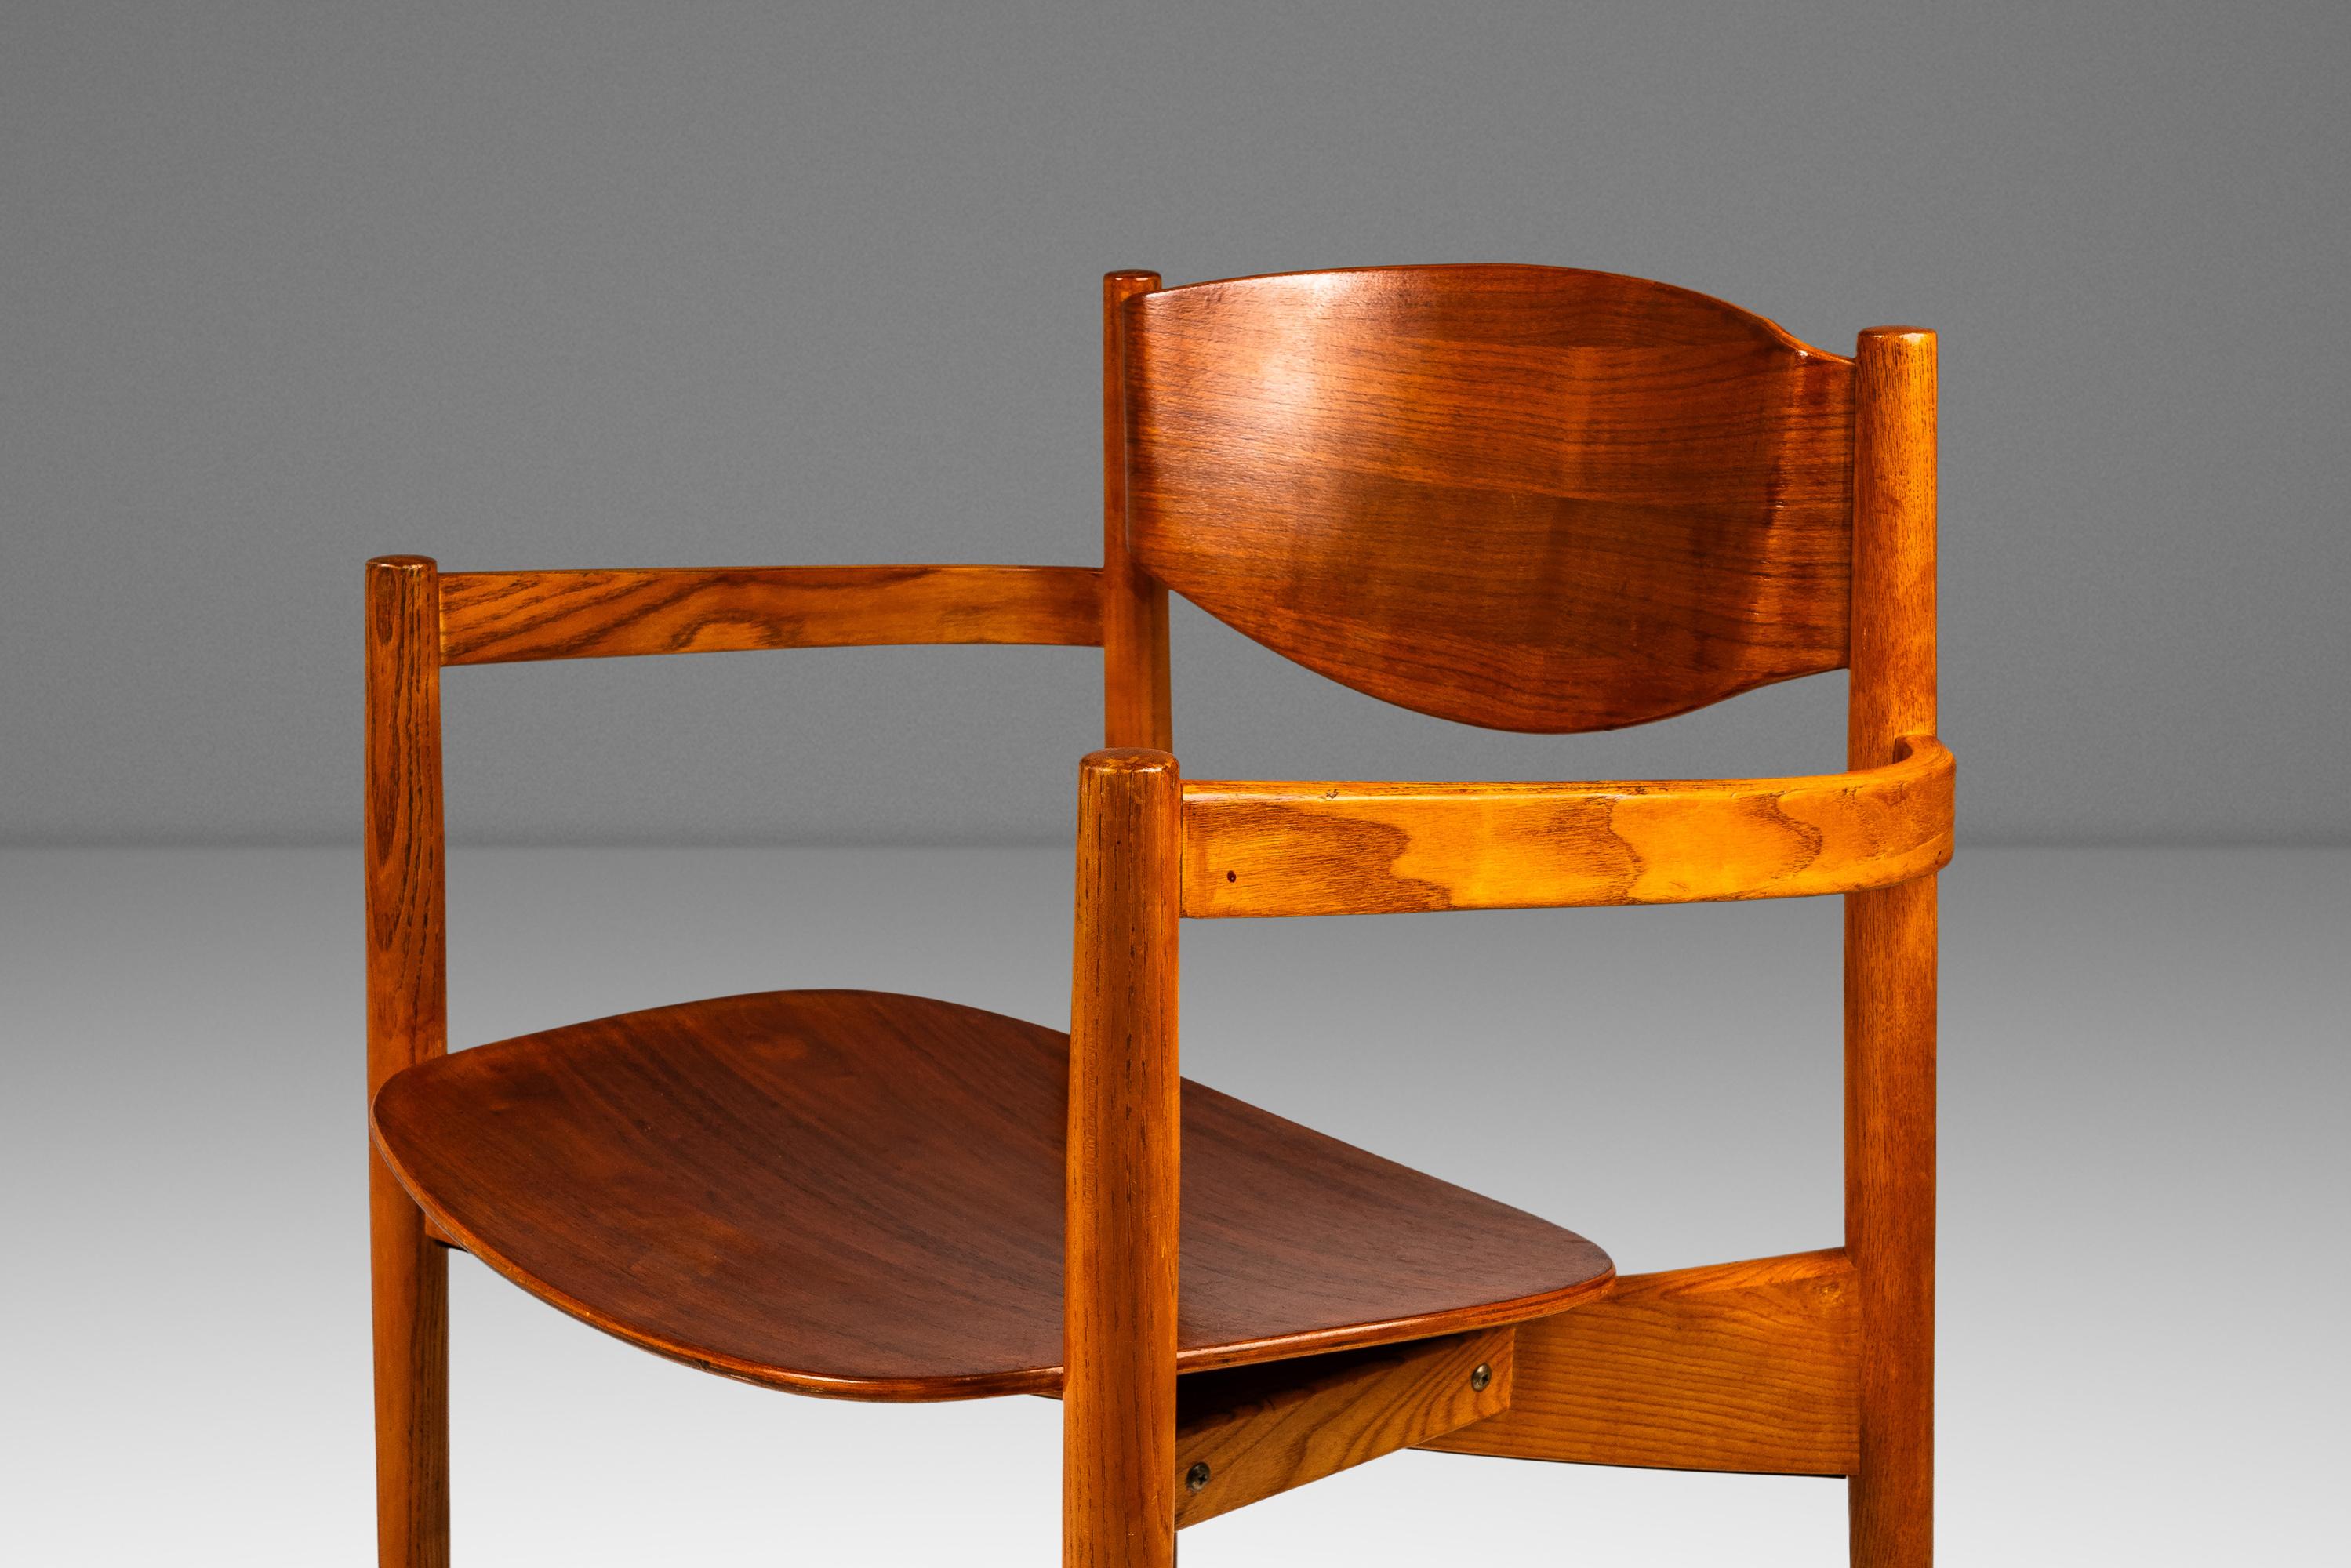 Set of 4 Stacking in Oak & Walnut Chairs by Jens Risom, USA, c. 1960s For Sale 7